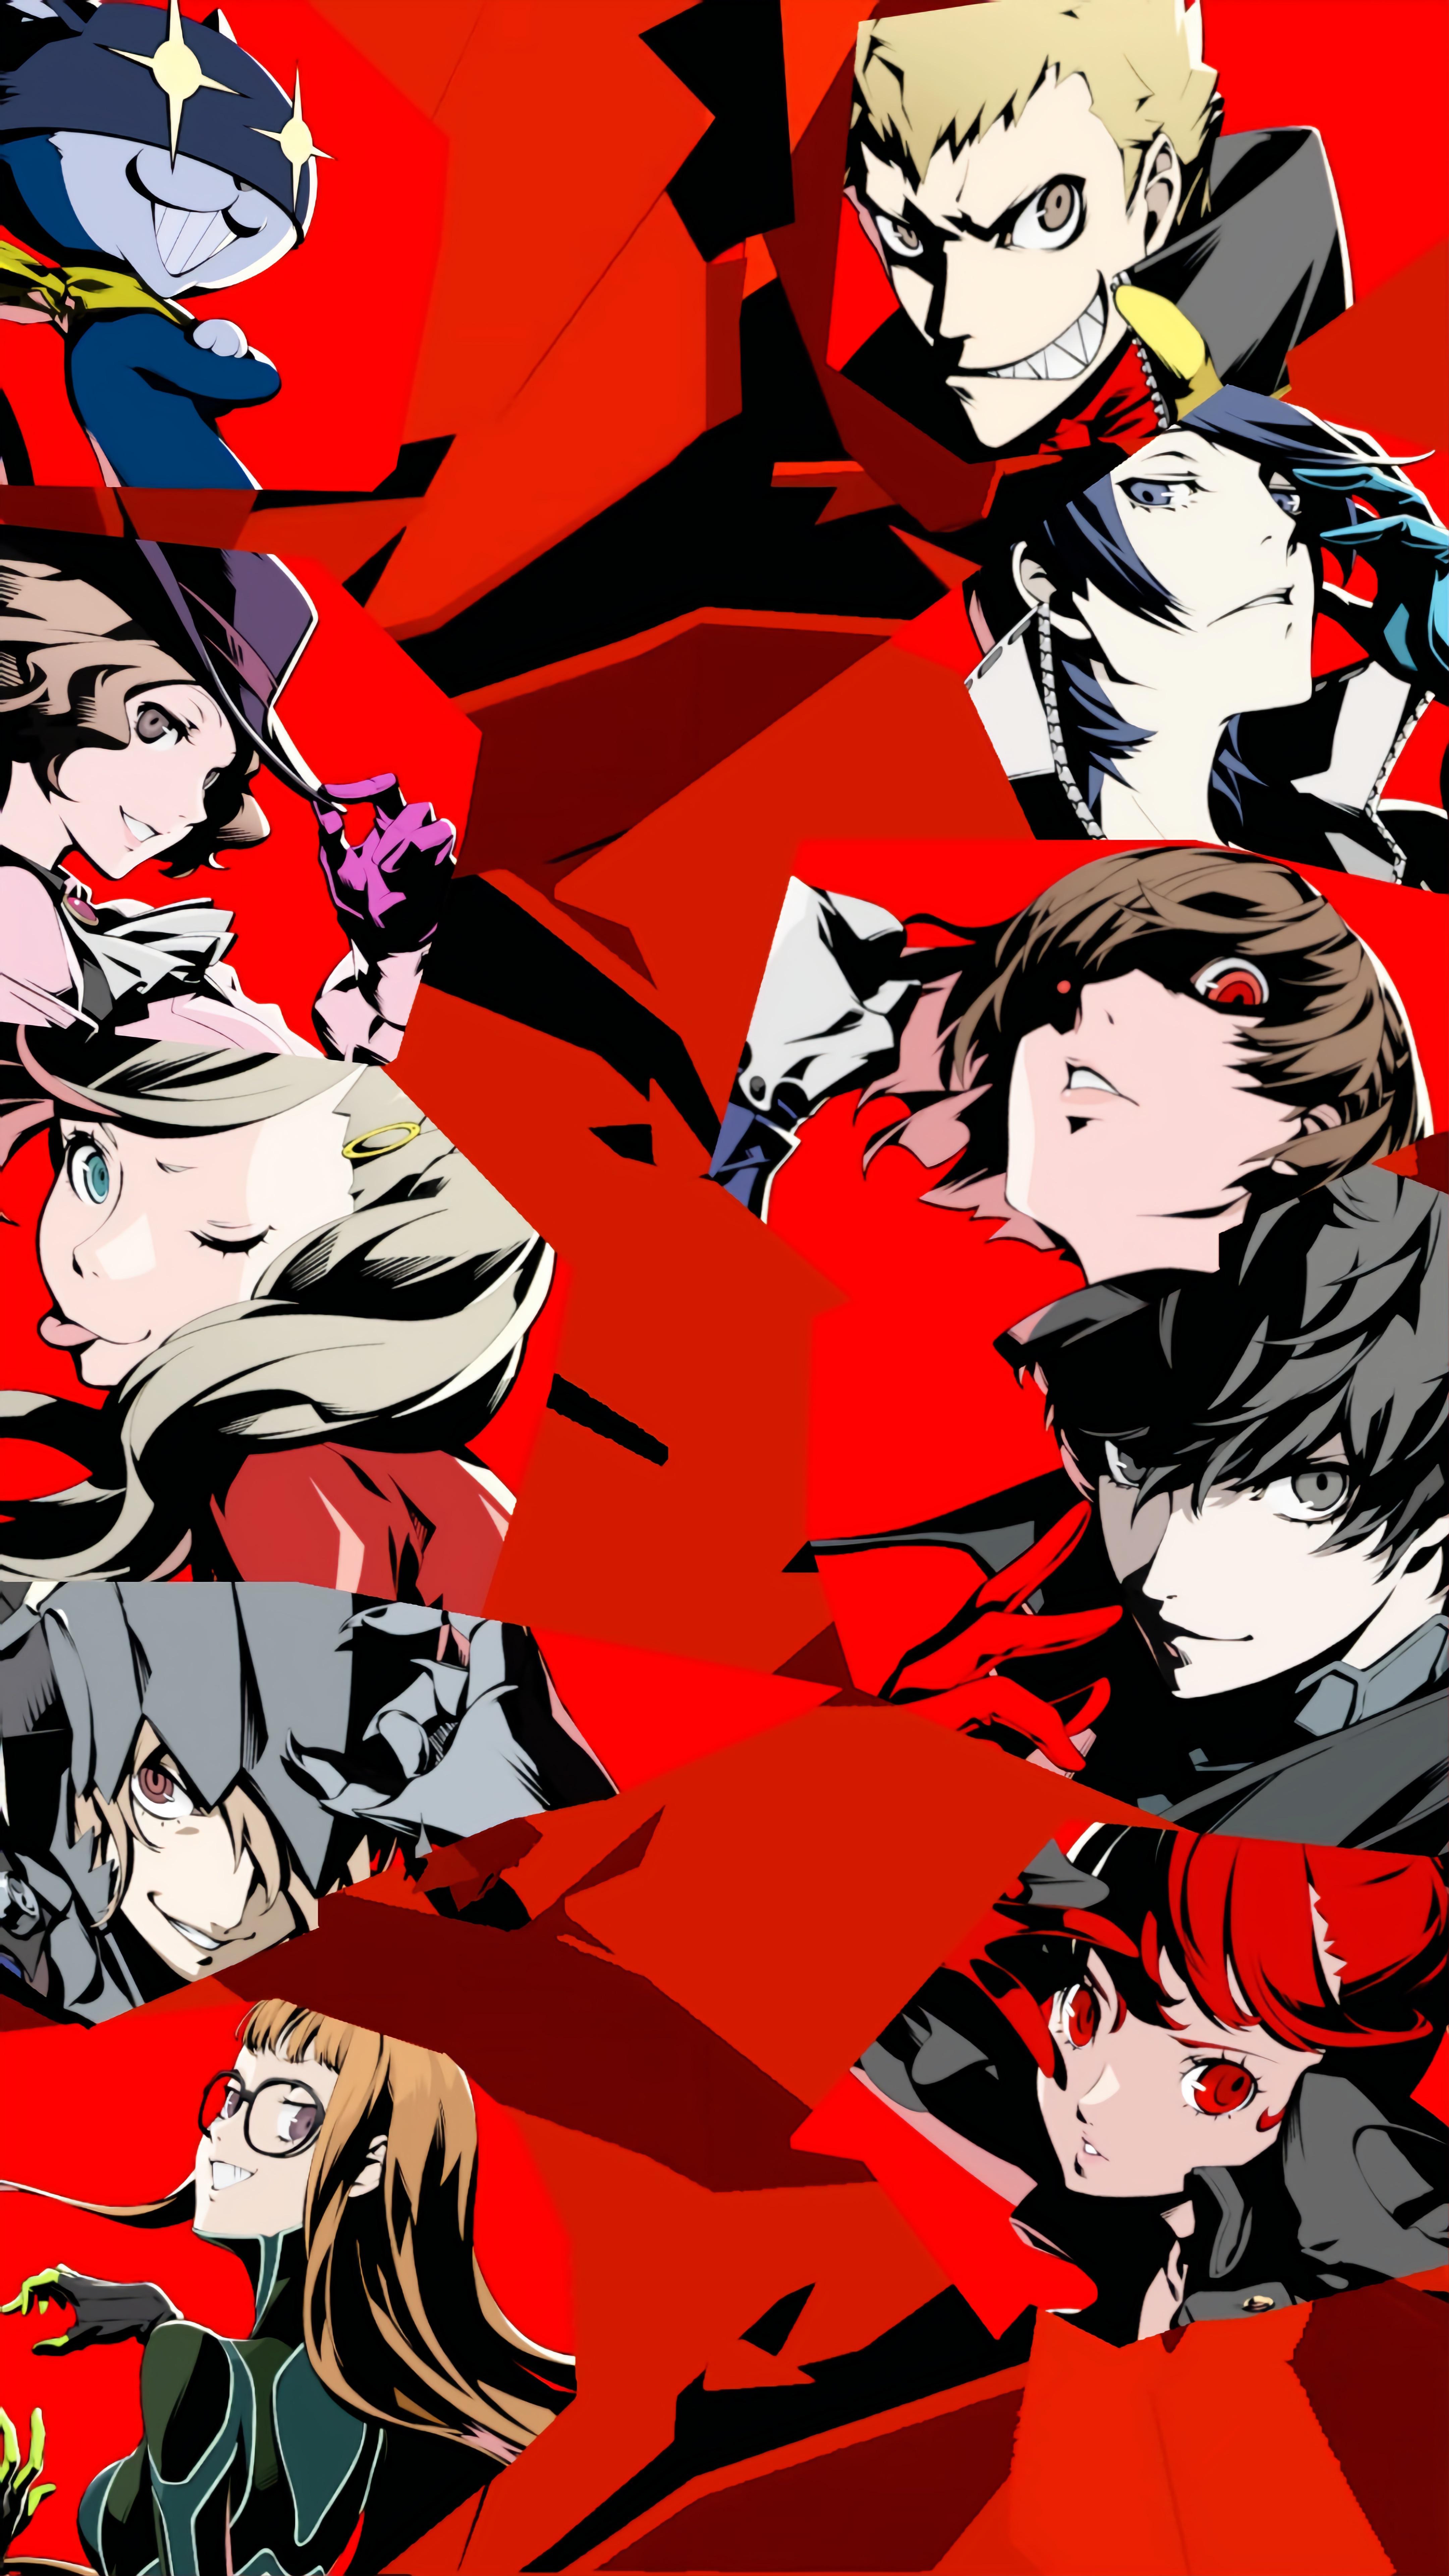 I used my mediocre editing skills to make a mobile wallpaper of all the Phantom Thieves: Persona5